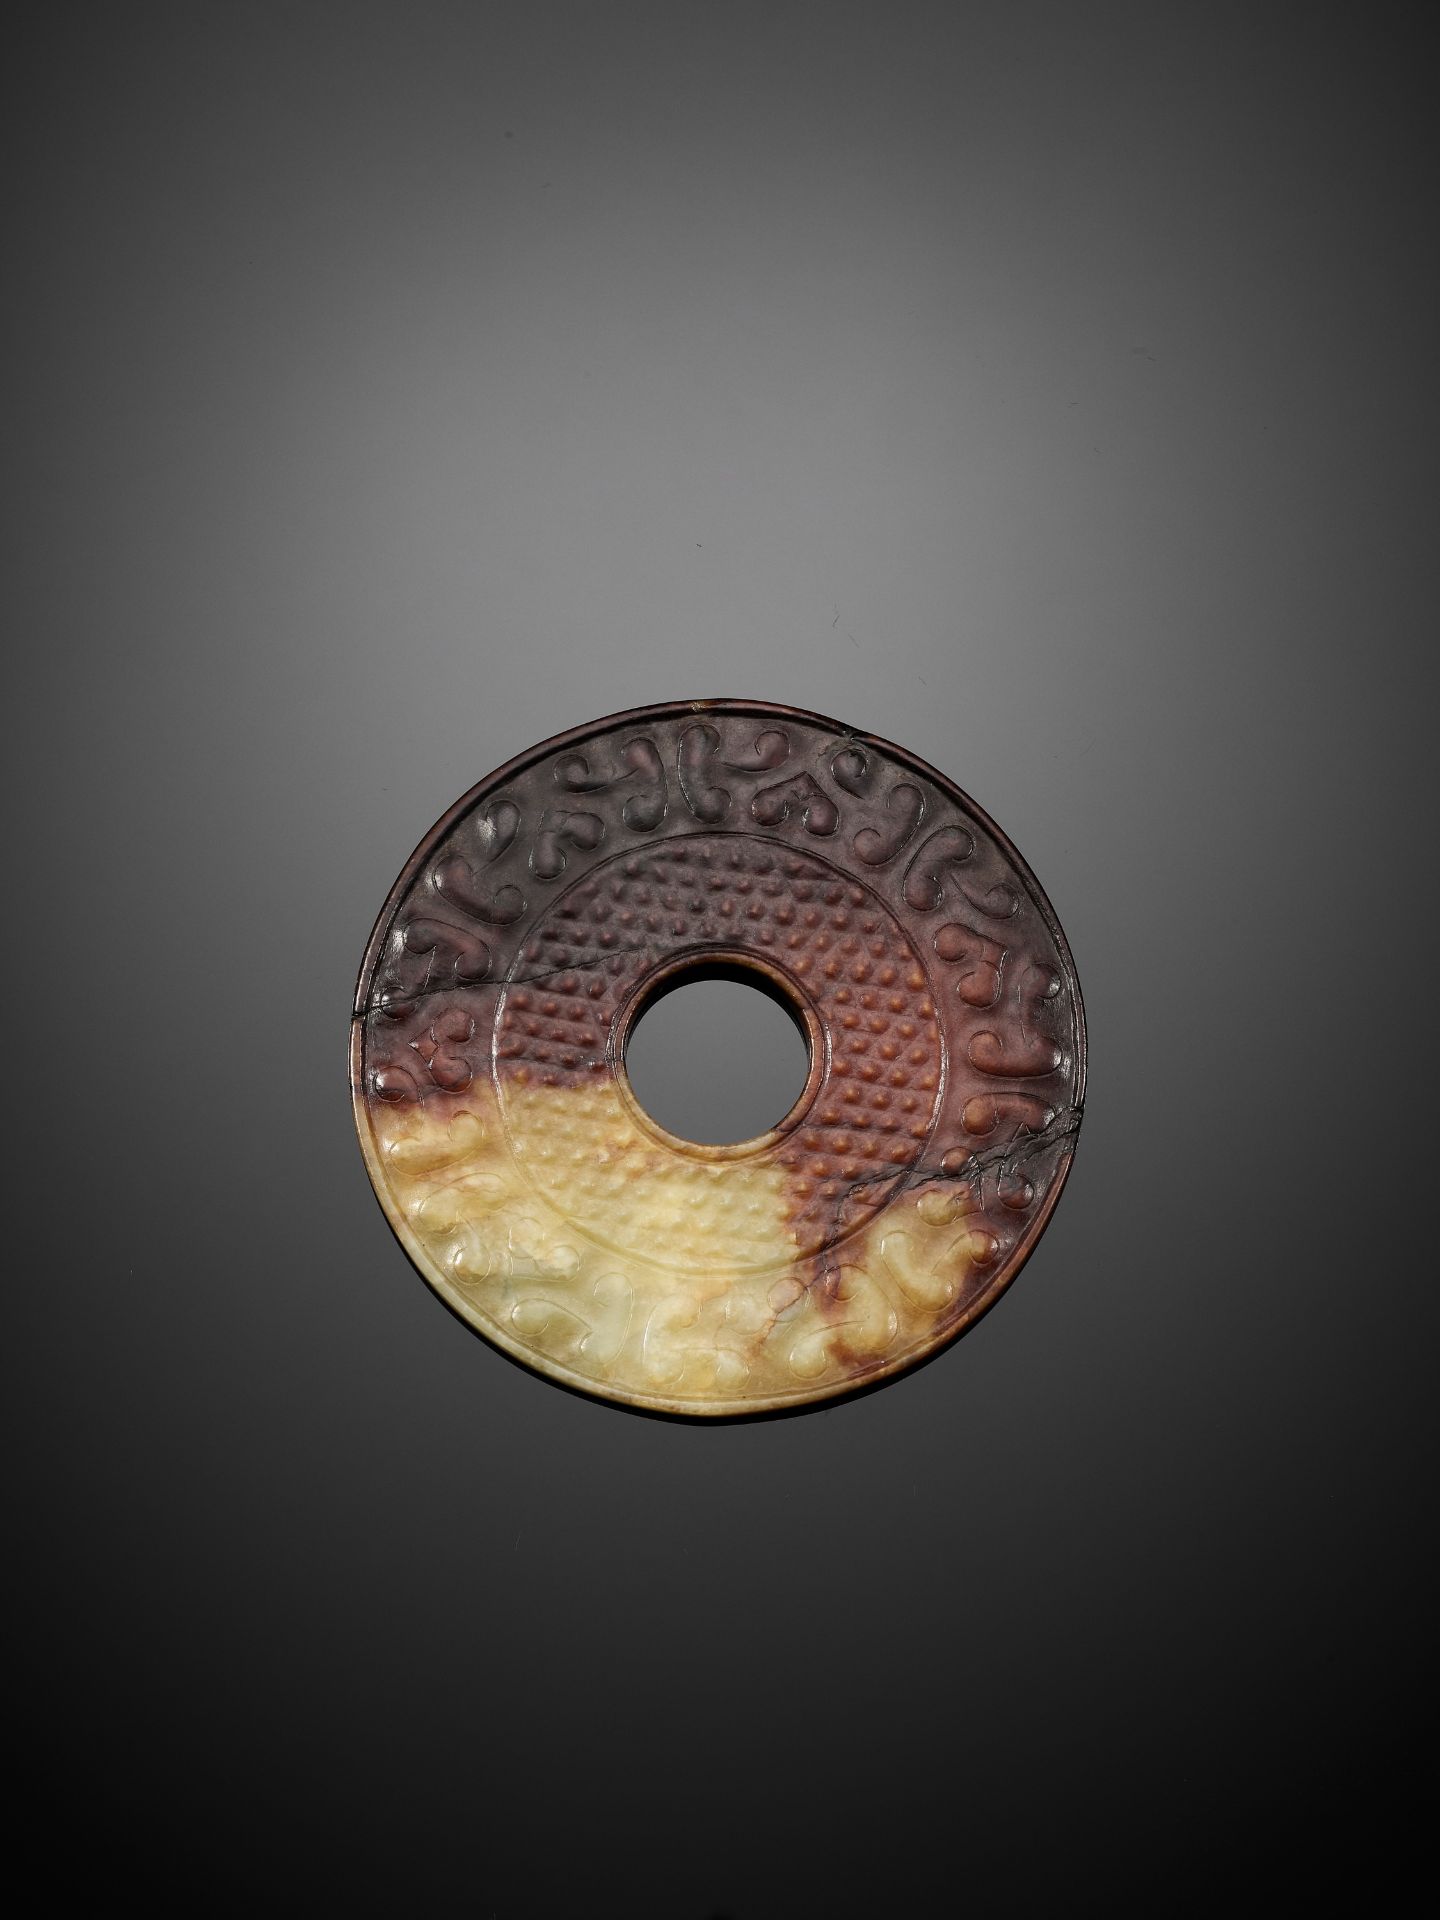 AN ARCHAISTIC PALE CELADON AND DARK RUSSET JADE BI DISC - Image 2 of 4